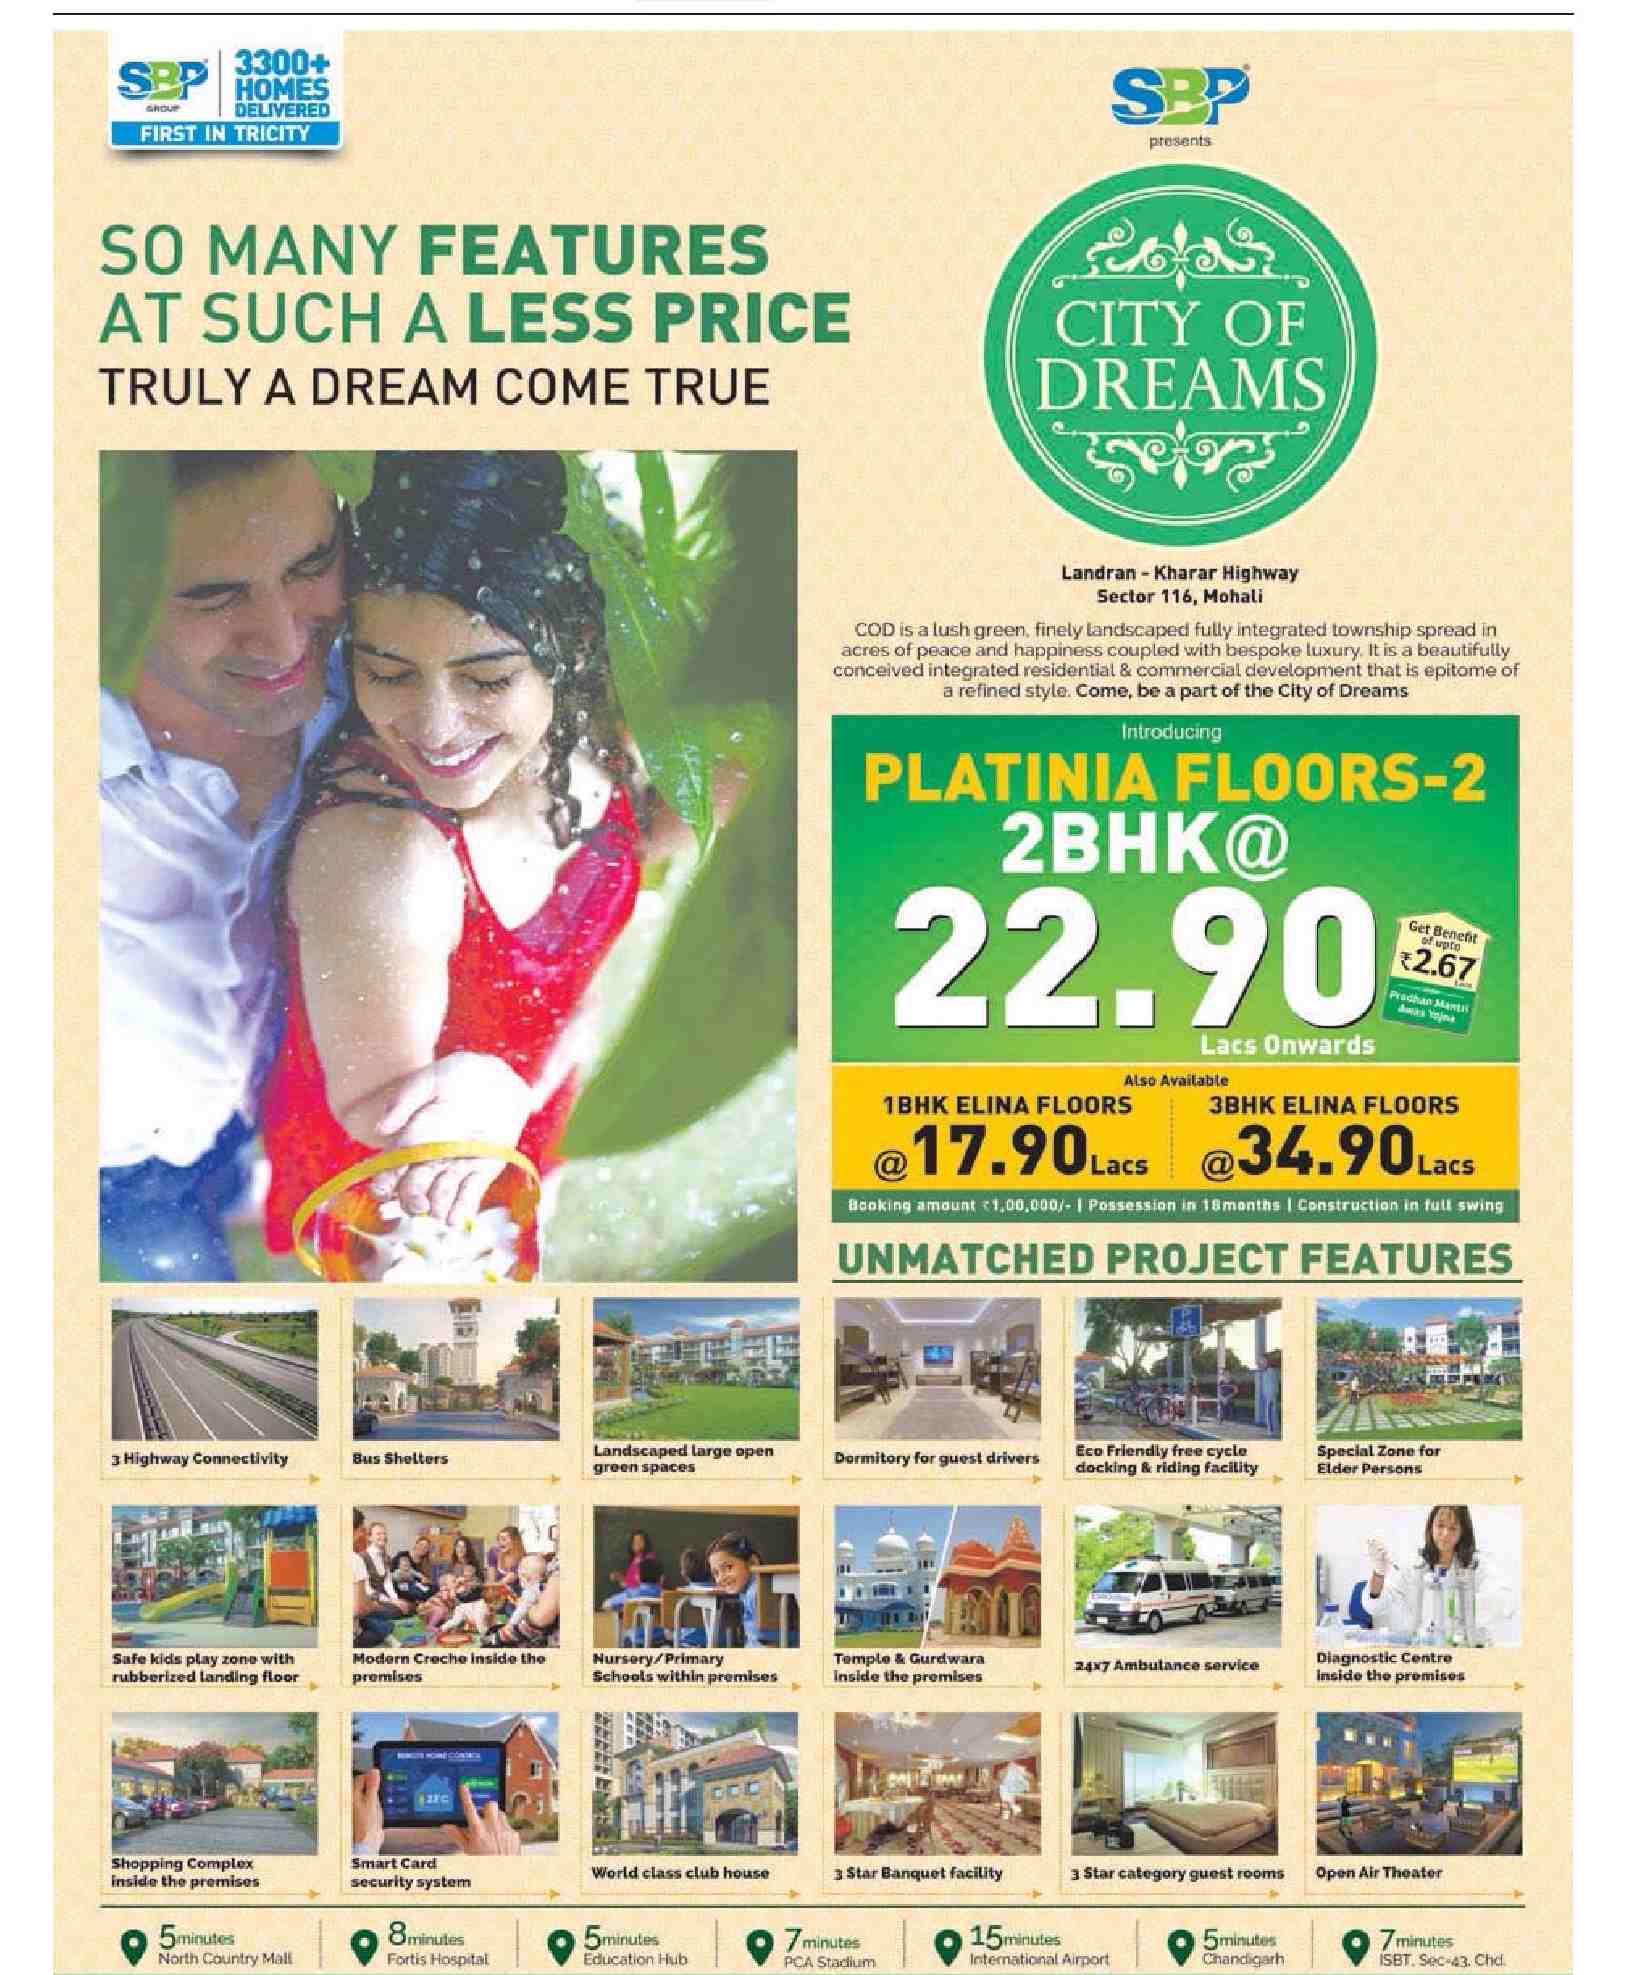 Many features at such less price is truly a dream come true at SBP City Of Dreams in Mohali